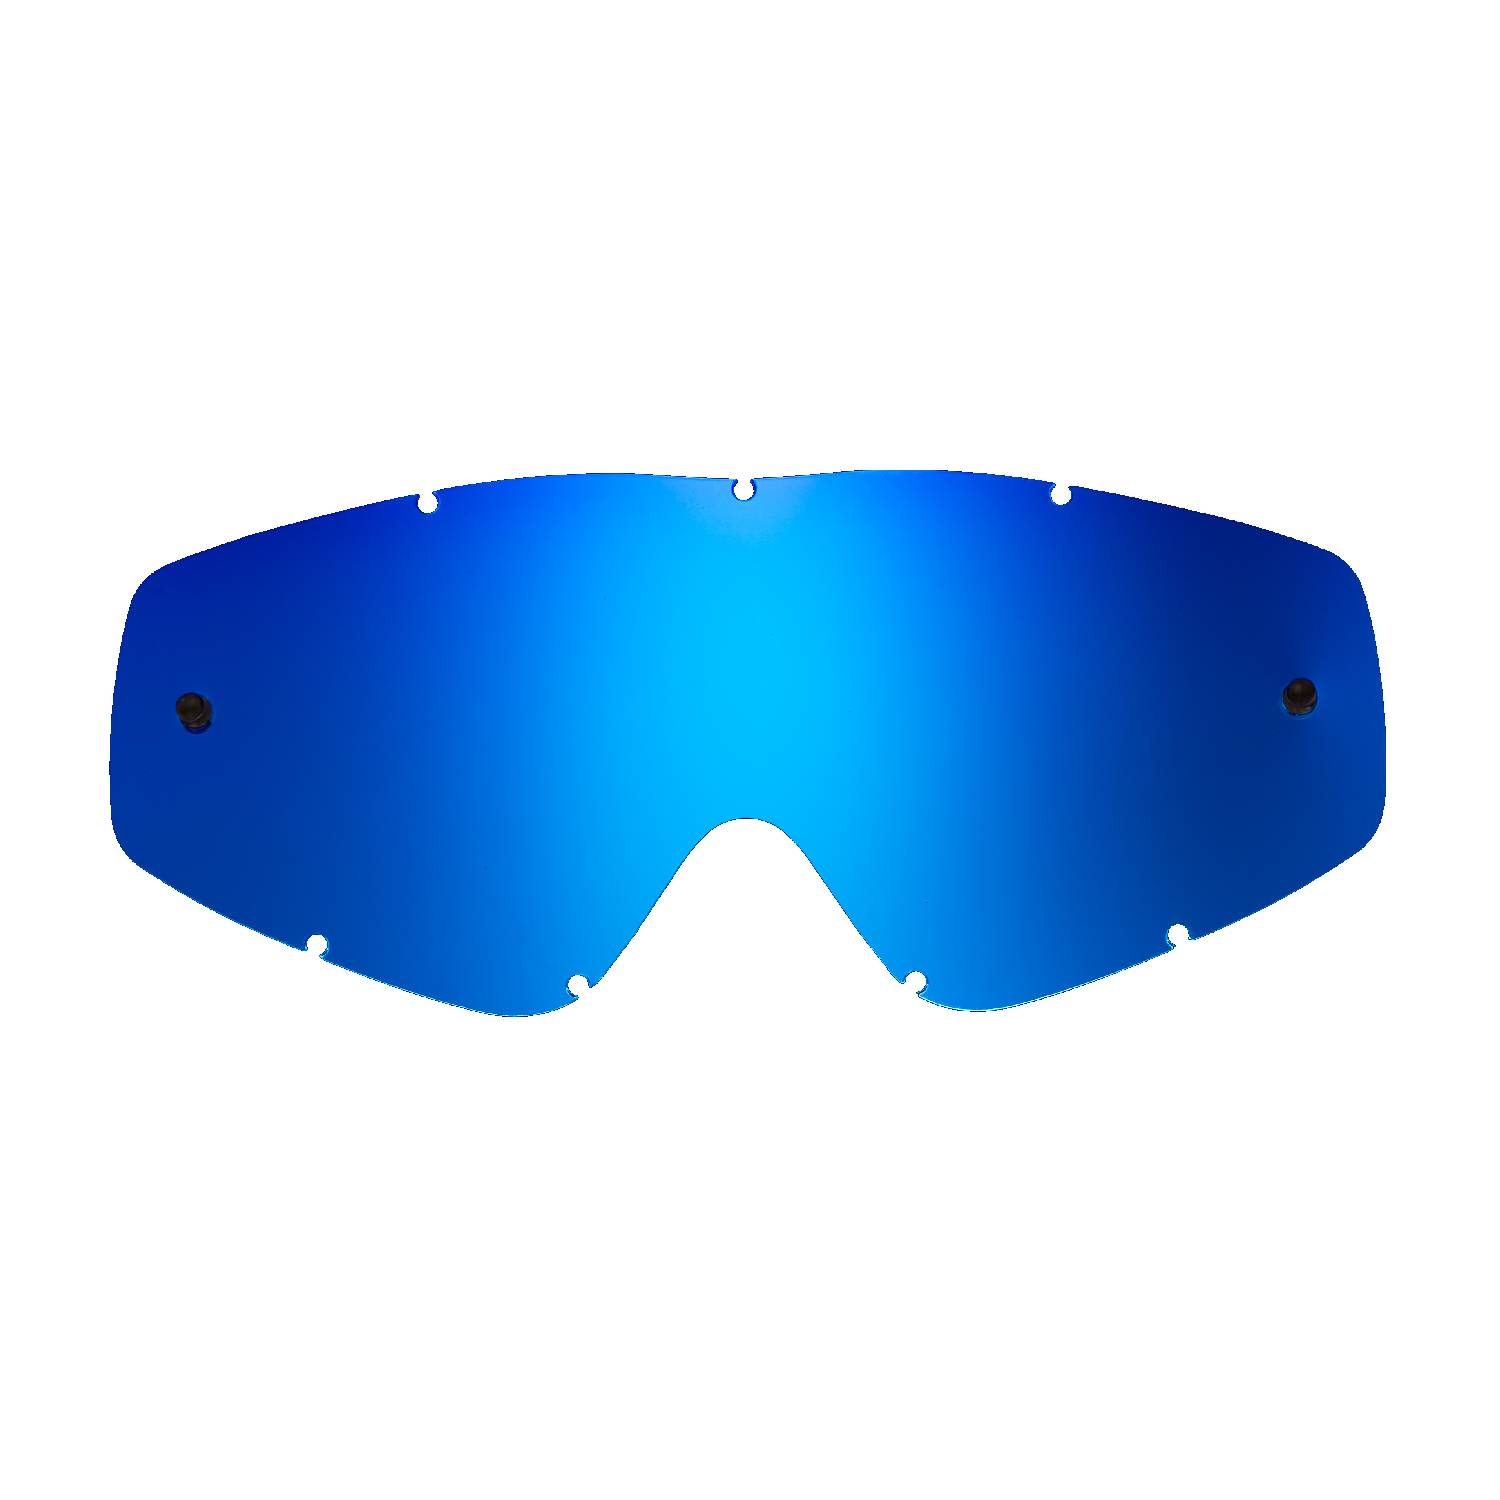 blue-toned mirrored replacement lenses for goggles compatible for Eks goggle